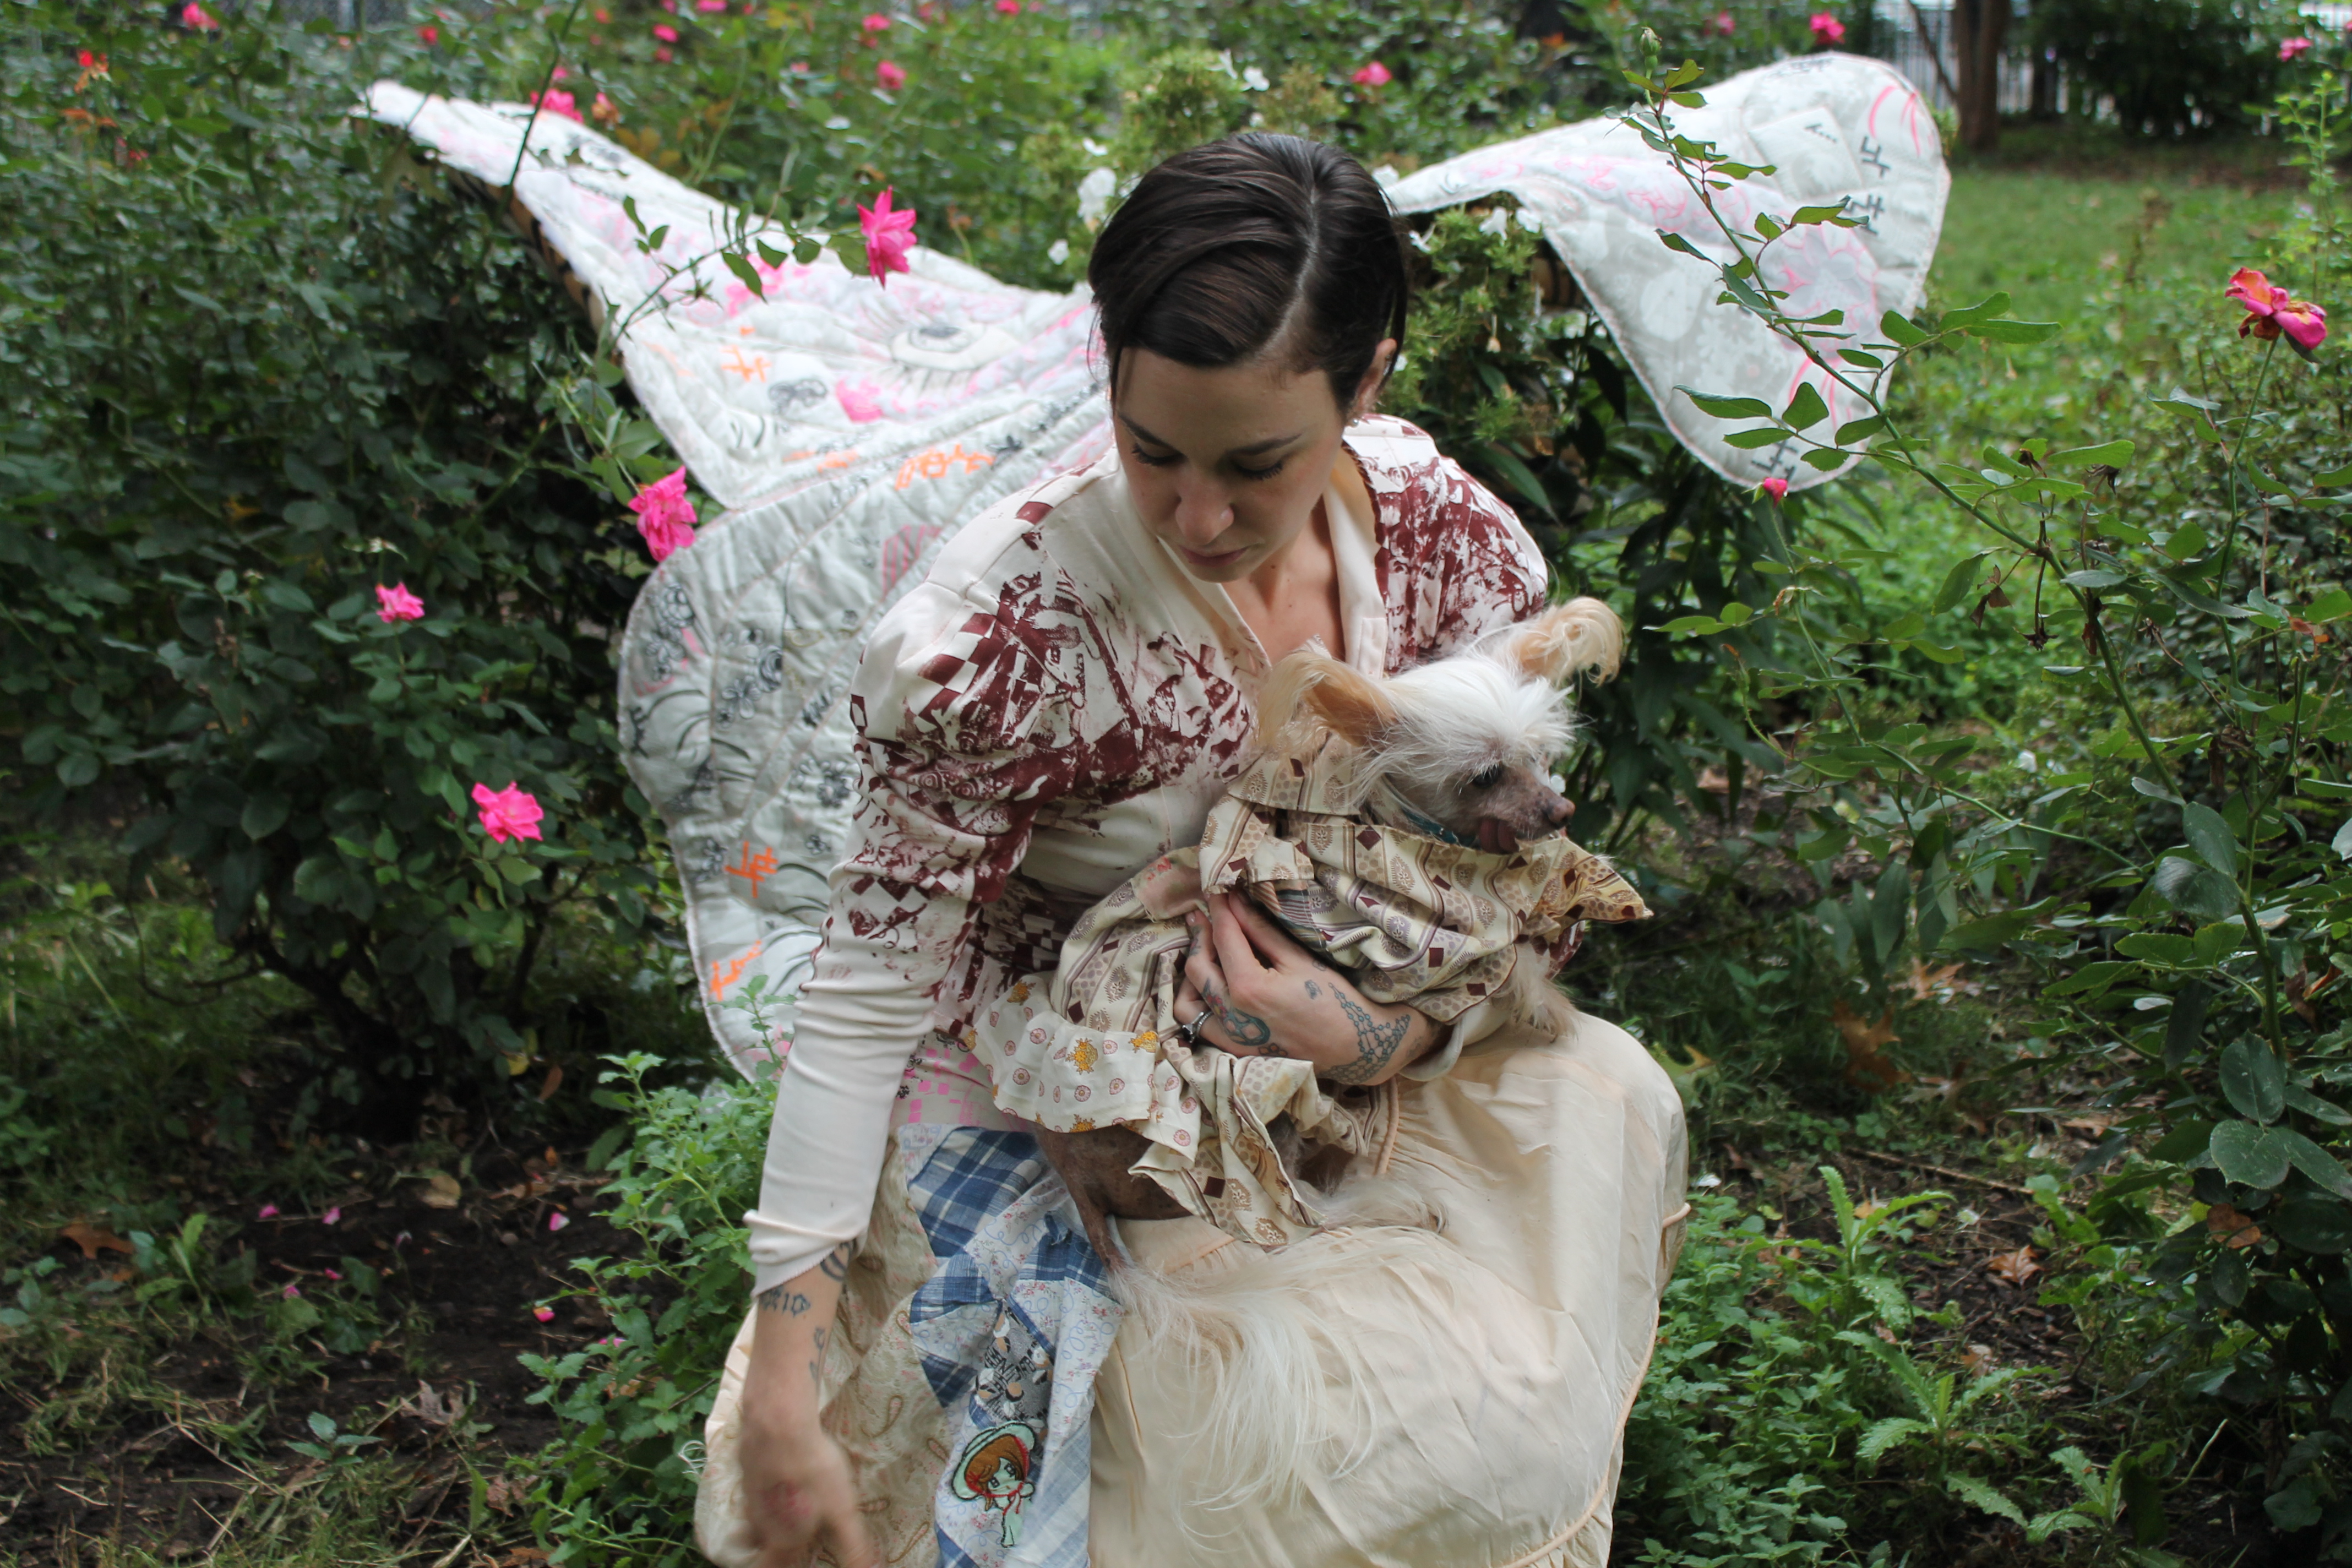 Trabulus and her dog, Misty, take a picnic in Tompkins Square Park both wearing garments by Women's History Museum, 2018. 